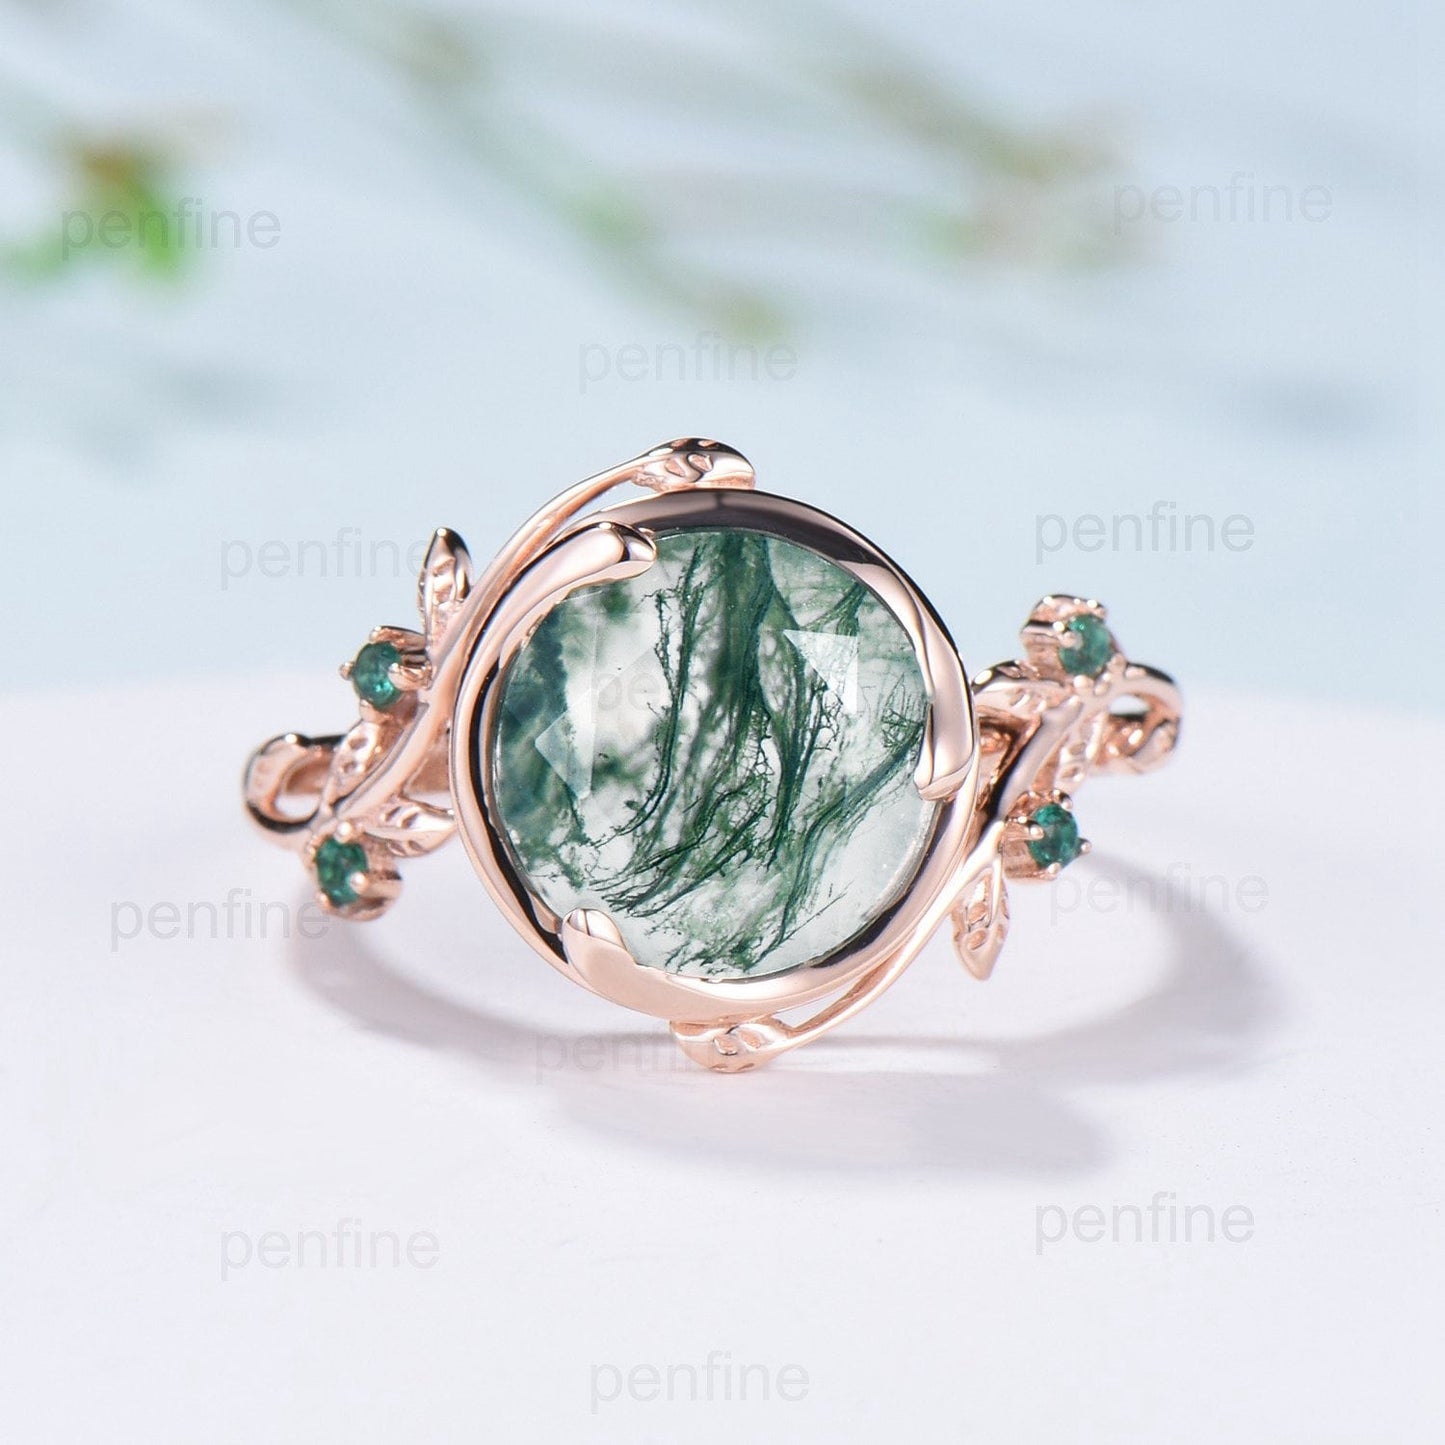 Elegant 10mm Round Cut Moss Agate Ring Nature Inspired Leaf Green Agate Engagement Ring 14K Rose Gold Wedding Ring for Women - PENFINE